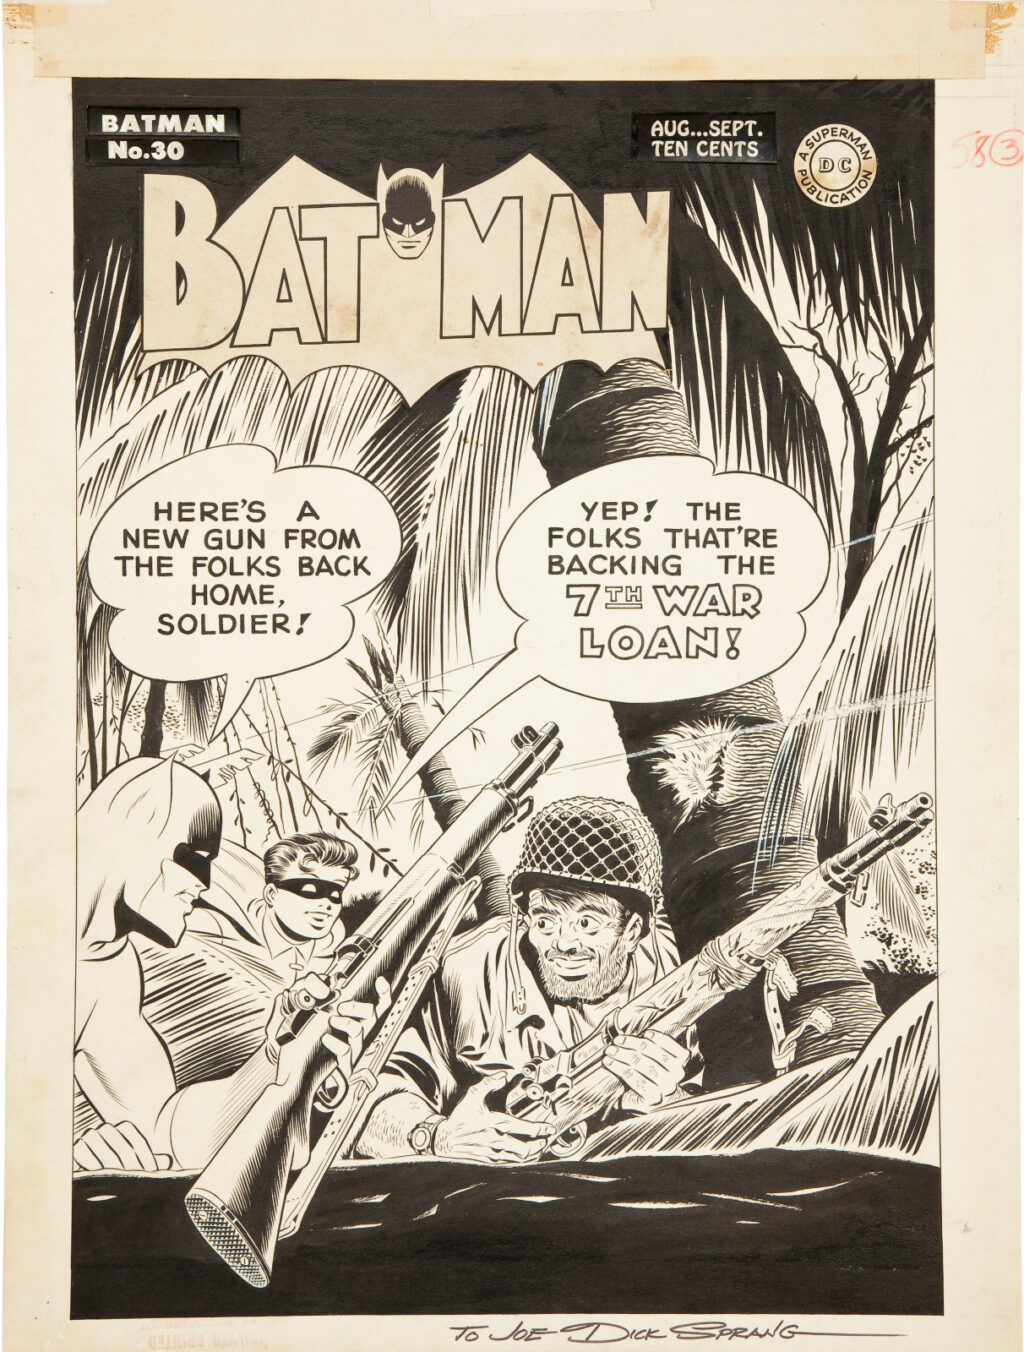 Batman issue 30 cover by Dick Sprang